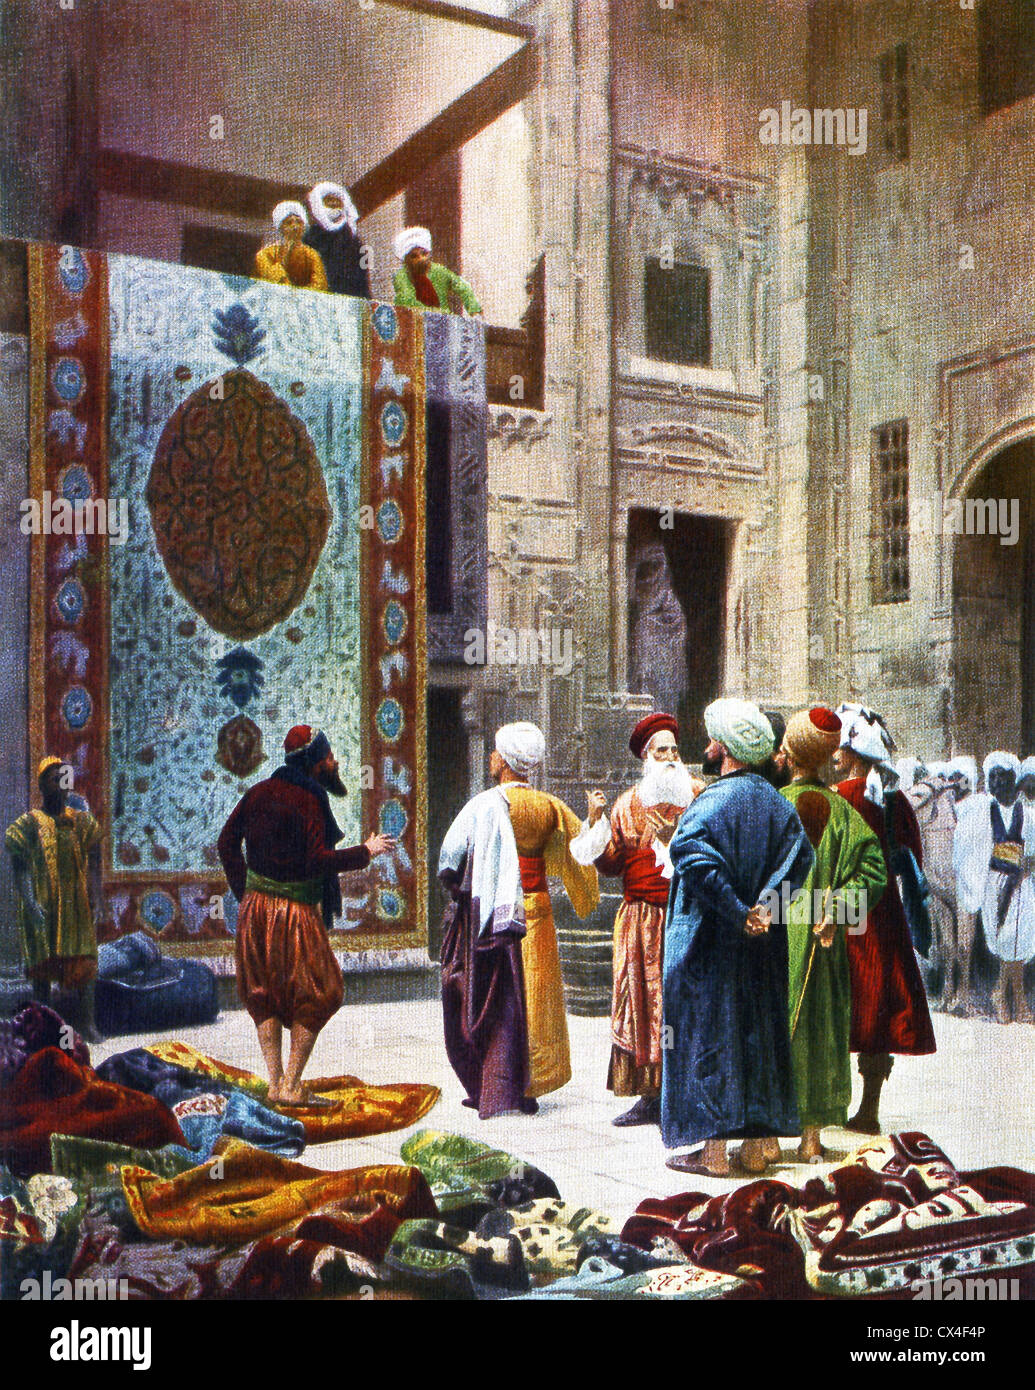 Jean-Leon Gerome, a French painter and sculptor, titled this work The  Vendor of Rugs Stock Photo - Alamy